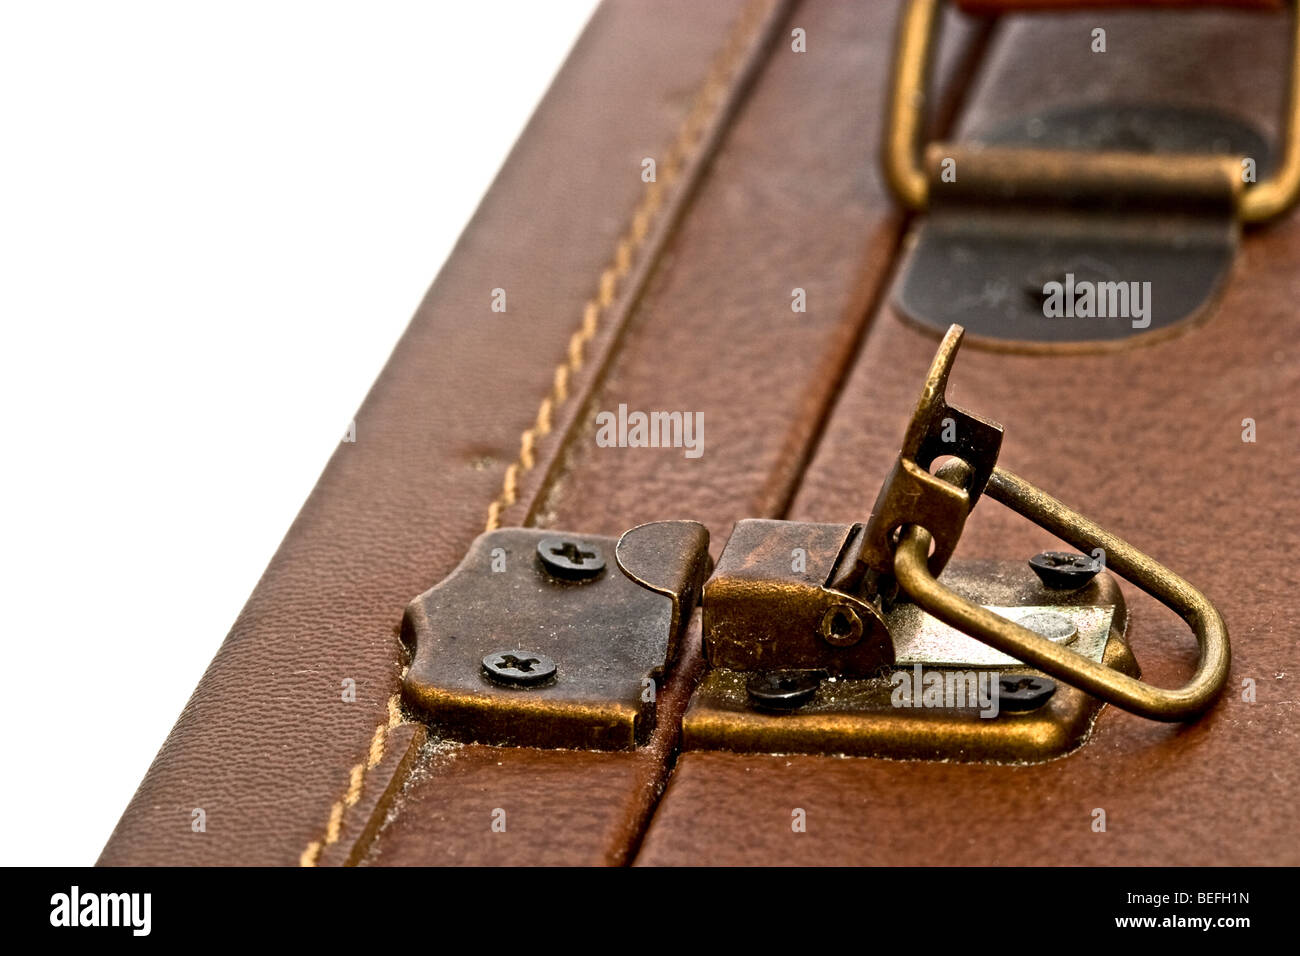 Old fashioned clasp on a brown leather briefcase in the open position. Stock Photo